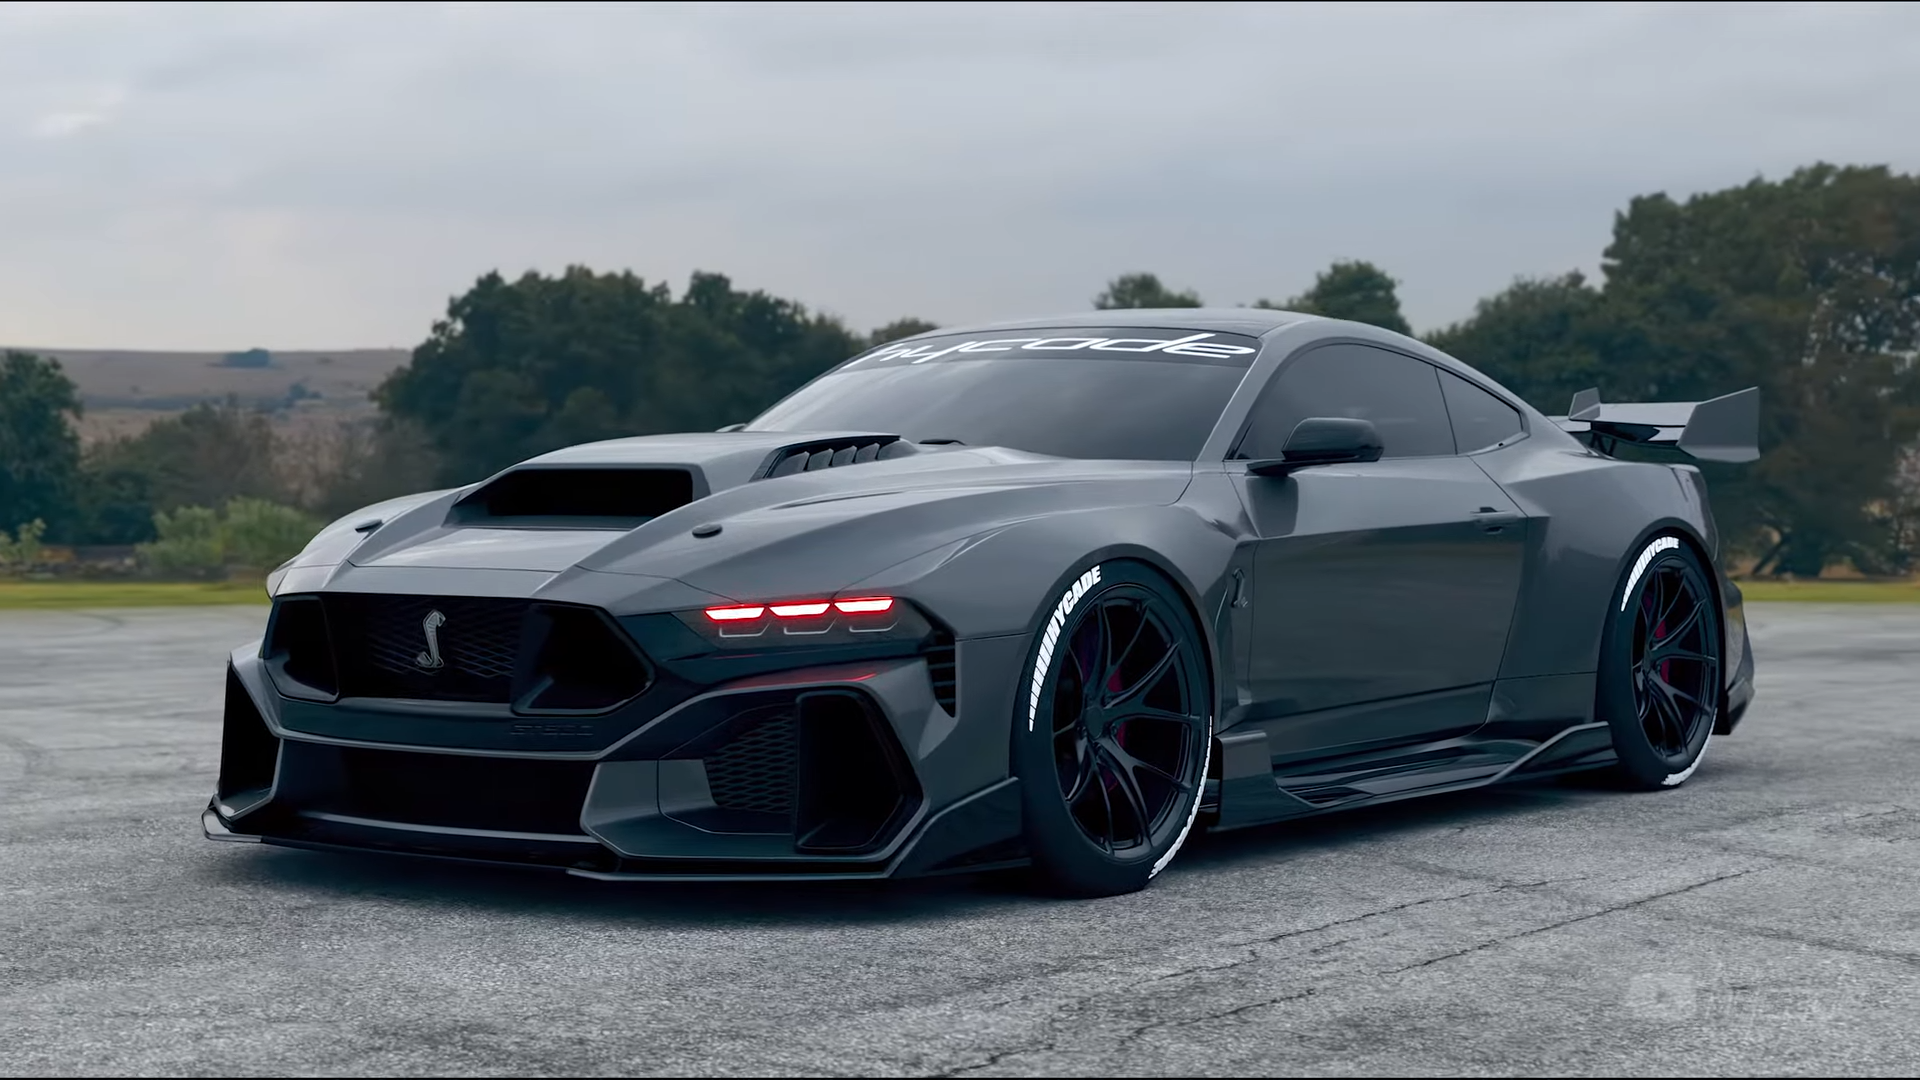 Ford Mustang GT 2024 Custom Body Kit by Hycade Køb med levering